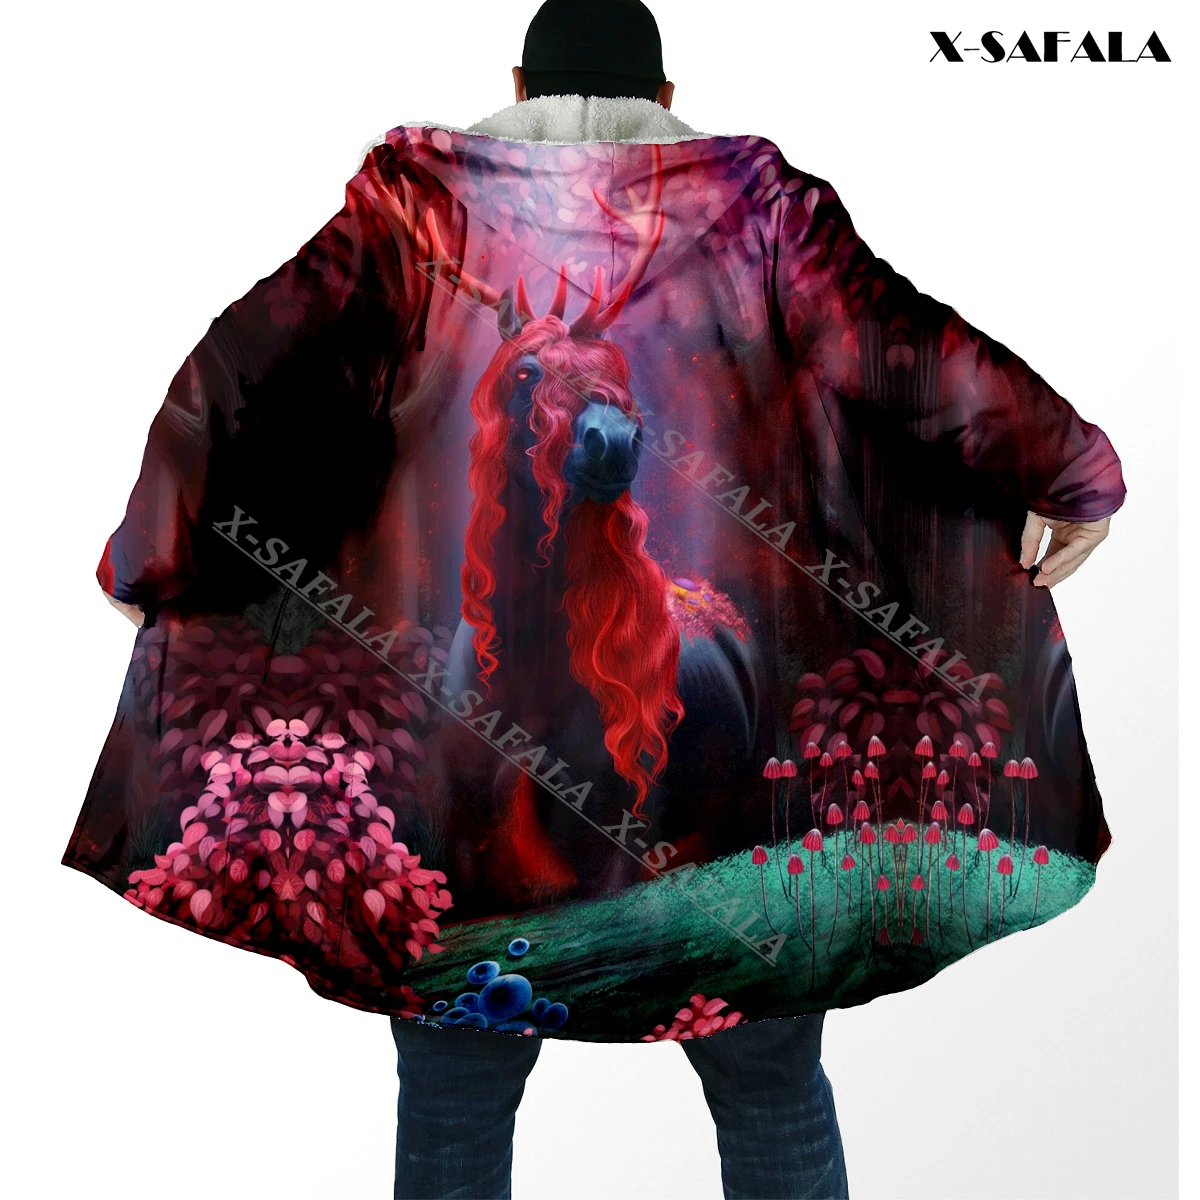 

Red Horse Nature Art Animal 3D Printed Hoodie Coat Hooded Blanket Cloak Thick Jacket Cotton Pullovers Dunnes Overcoat